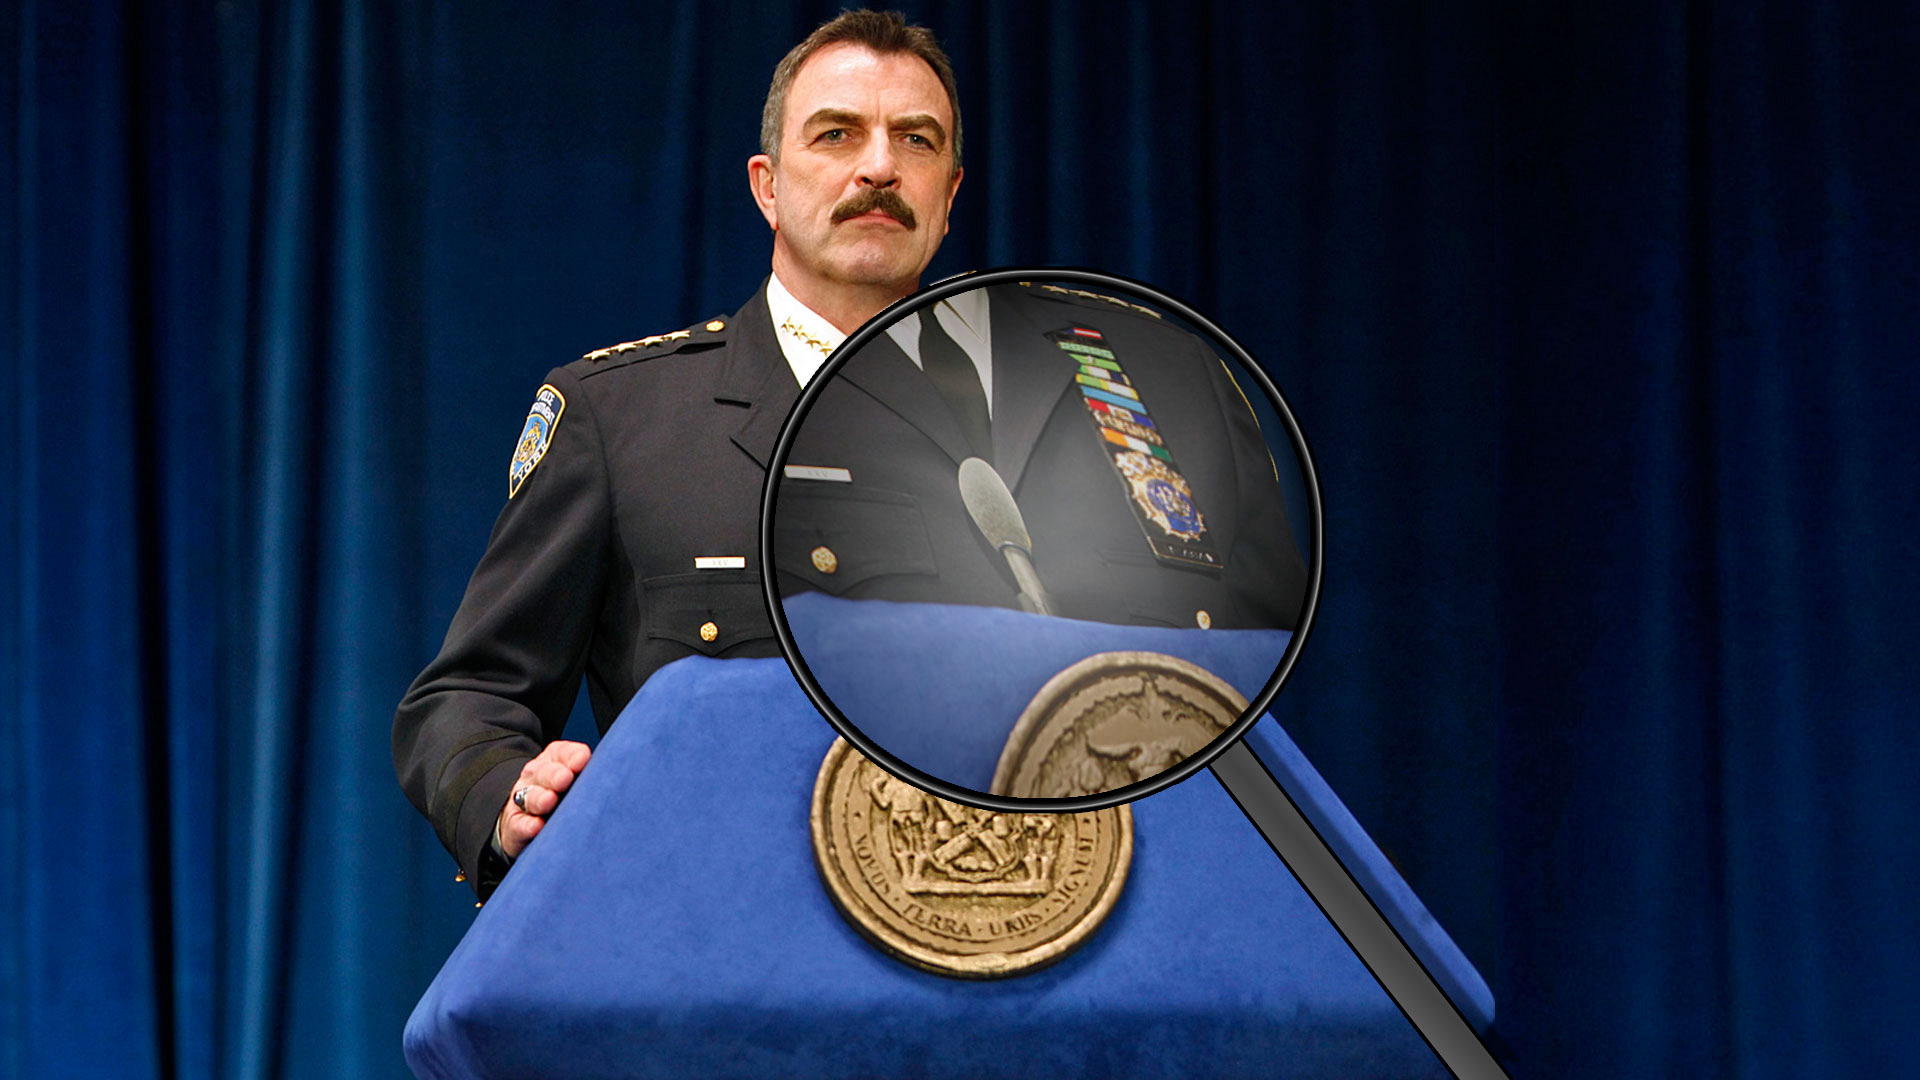 9 Reasons Why Frank Reagan Is The Ultimate Hero - Page 5 - Blue Bloods Photos - CBS.com1920 x 1080